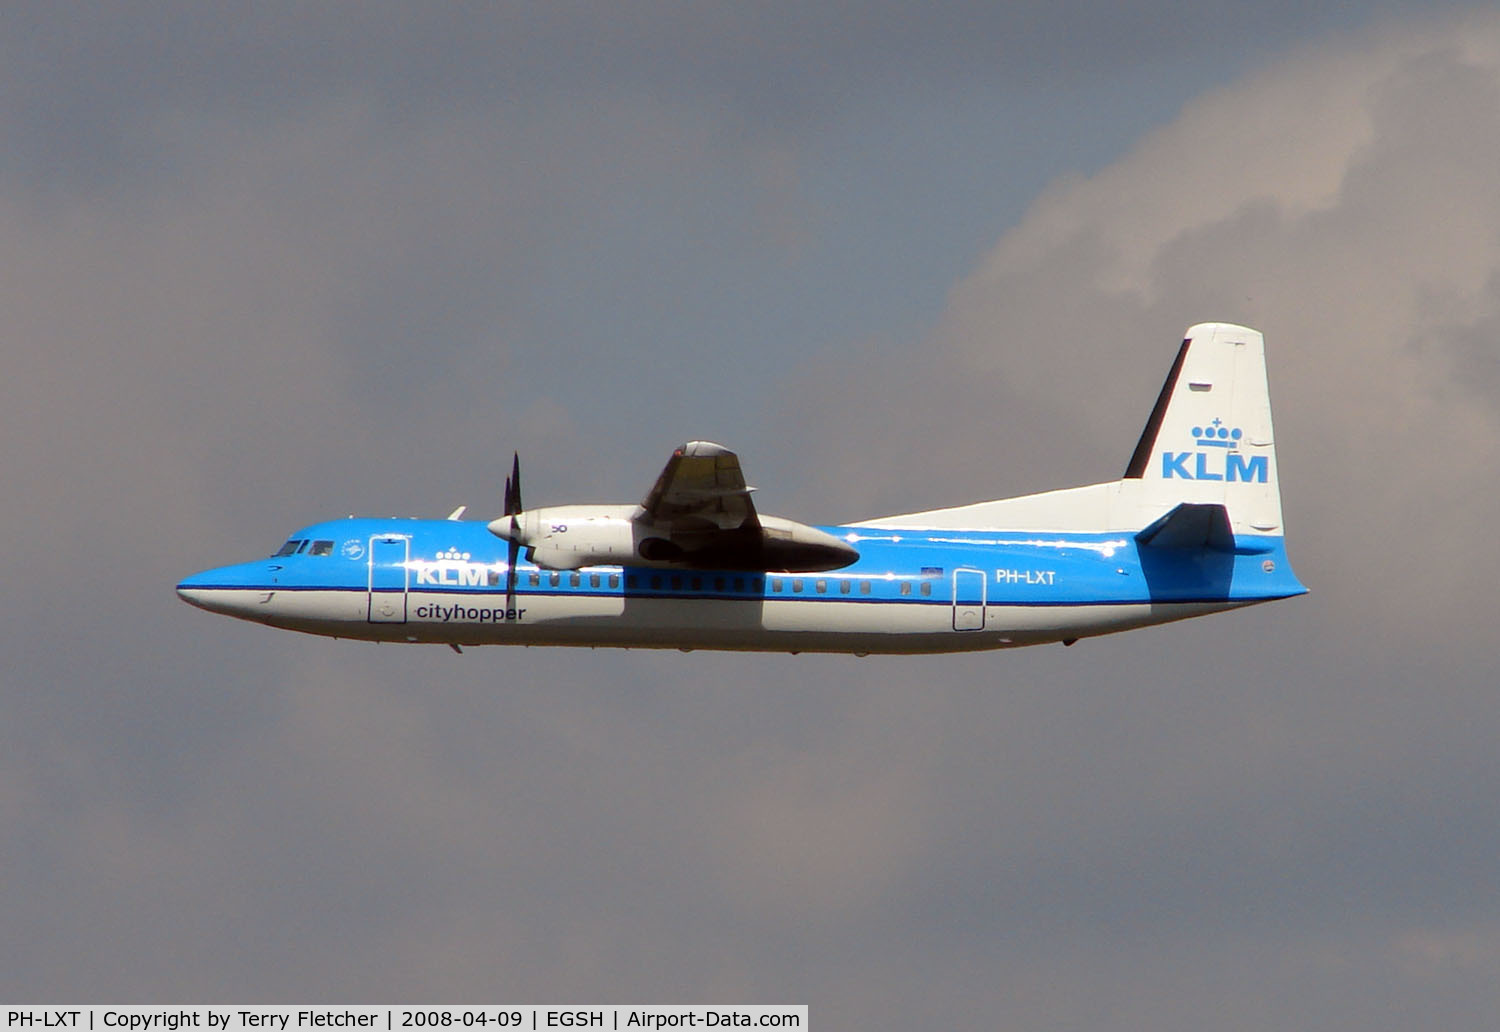 PH-LXT, 1993 Fokker 50 C/N 20279, KLM Fokker 50 climbs away from Norwich UK - one of the few scheduled flights from this East Anglian City